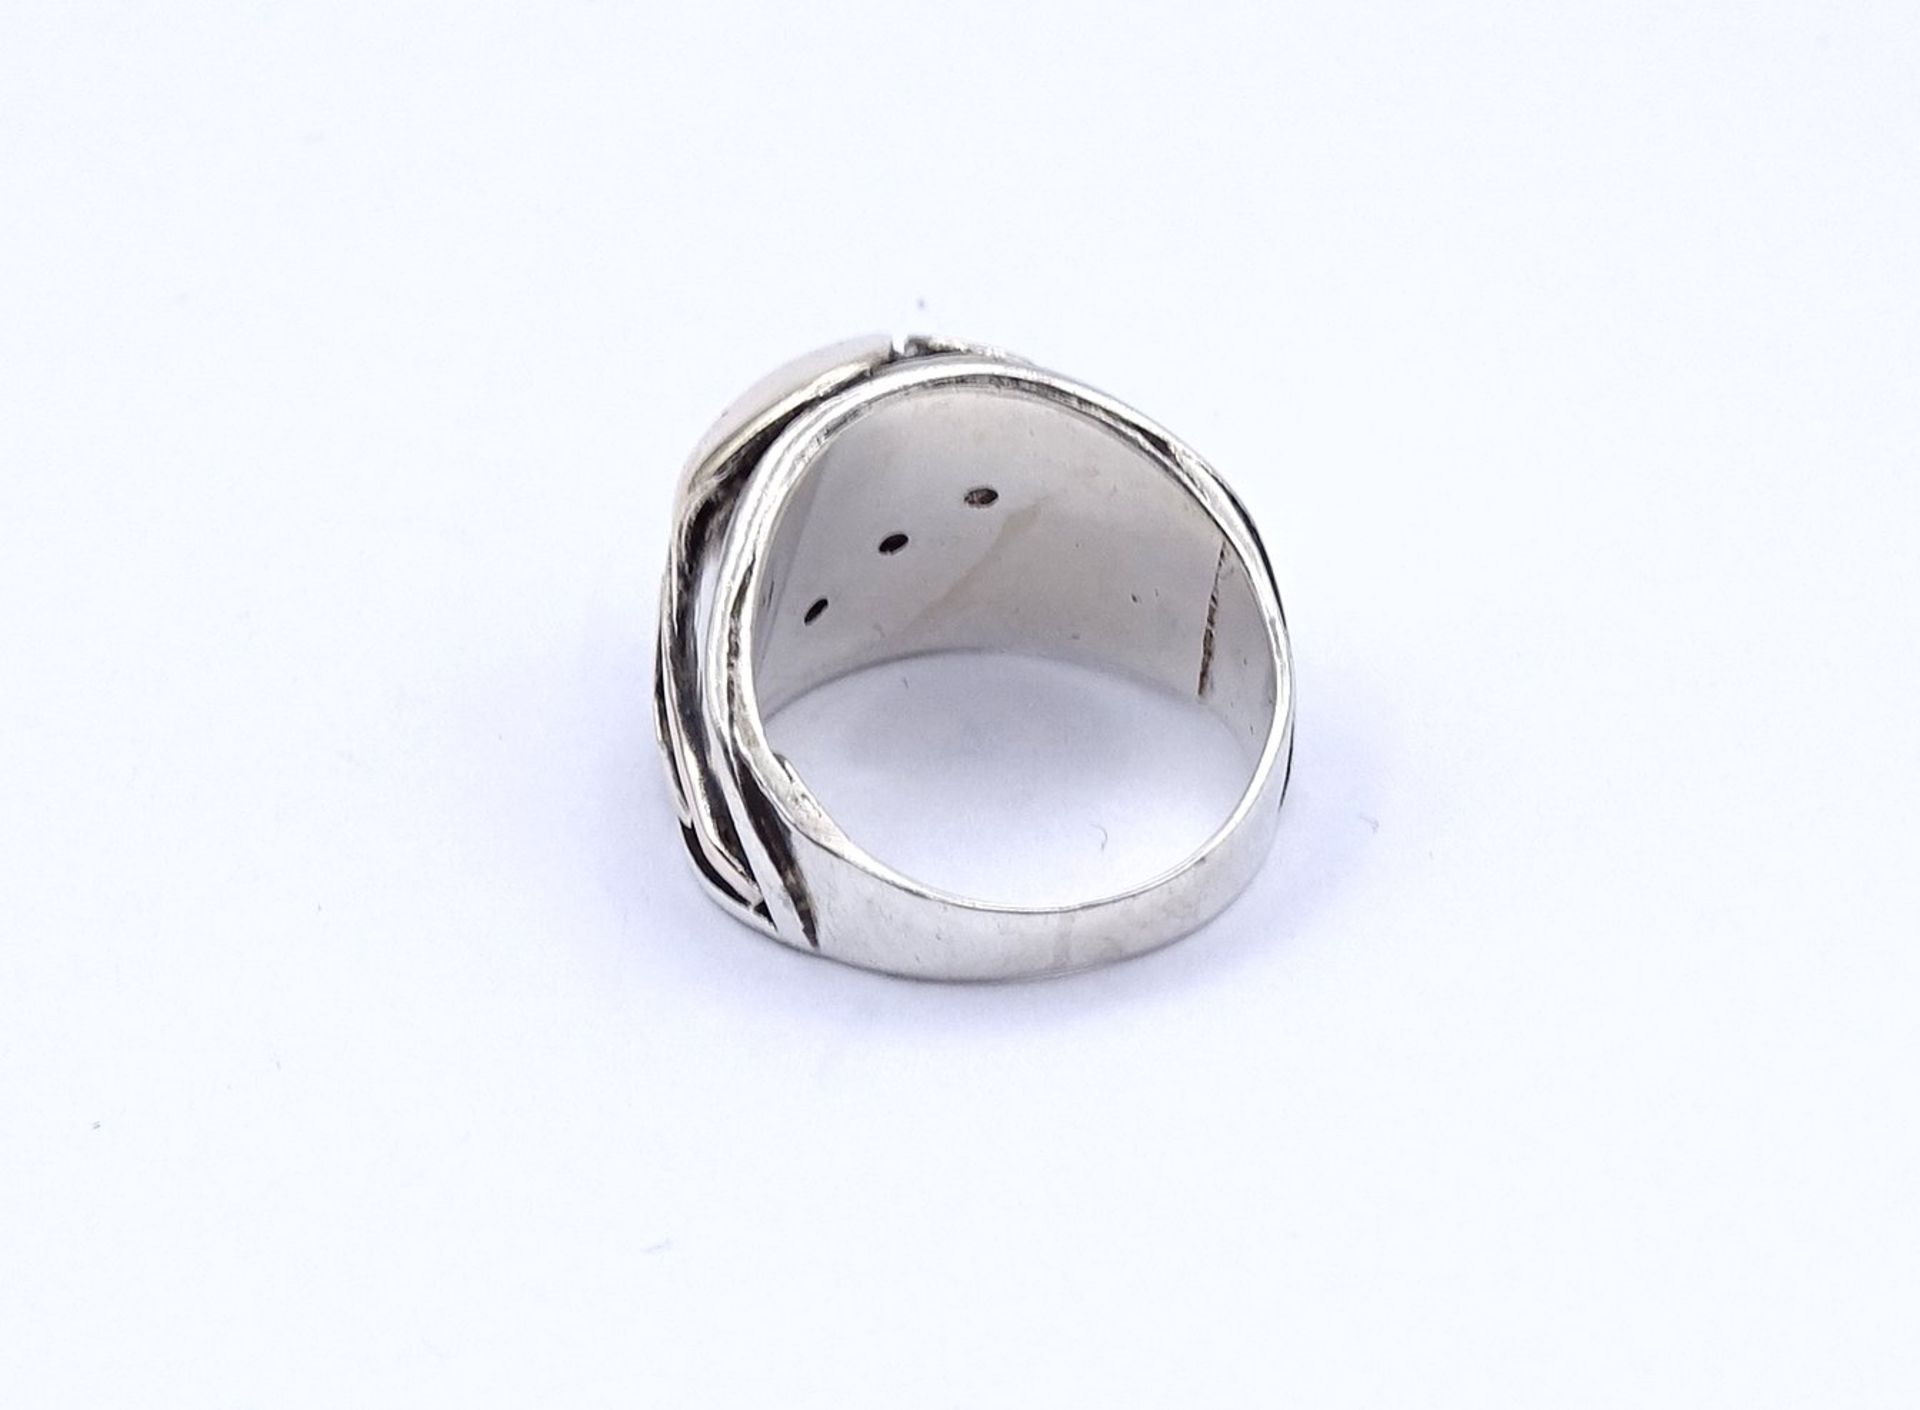 Silber + Gold Ring, AB bez. 6,6g., RG 49/50 - Image 3 of 4